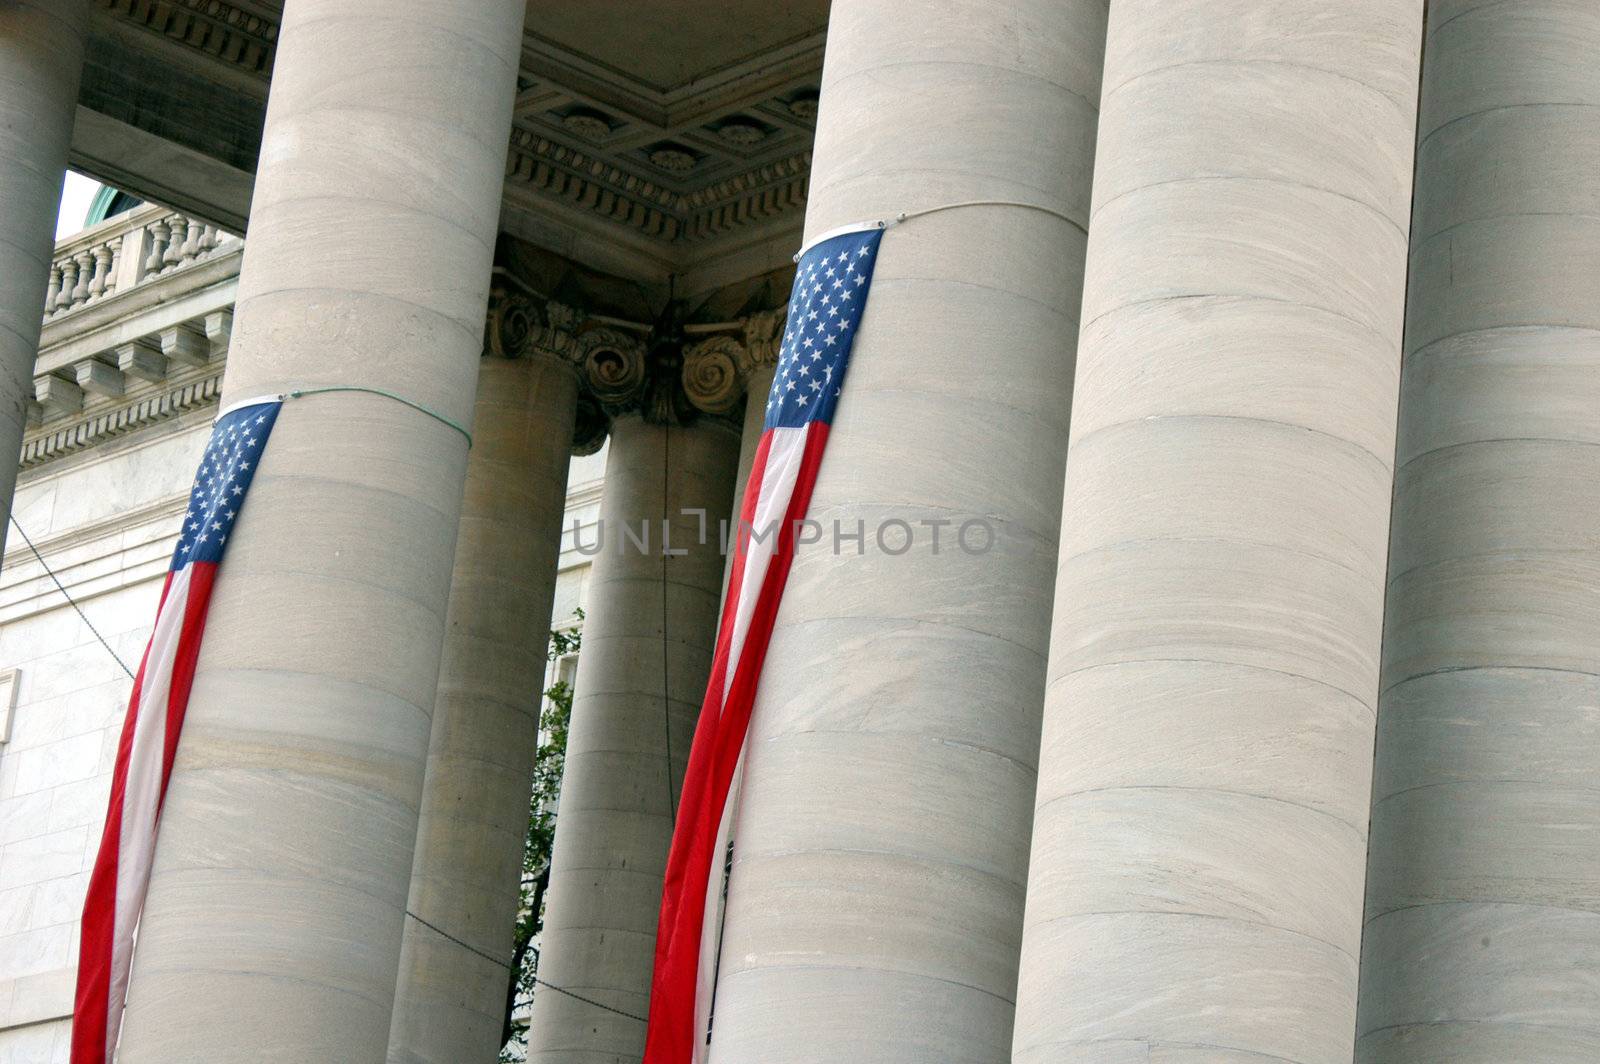  Columns at a government building in Washington, DC